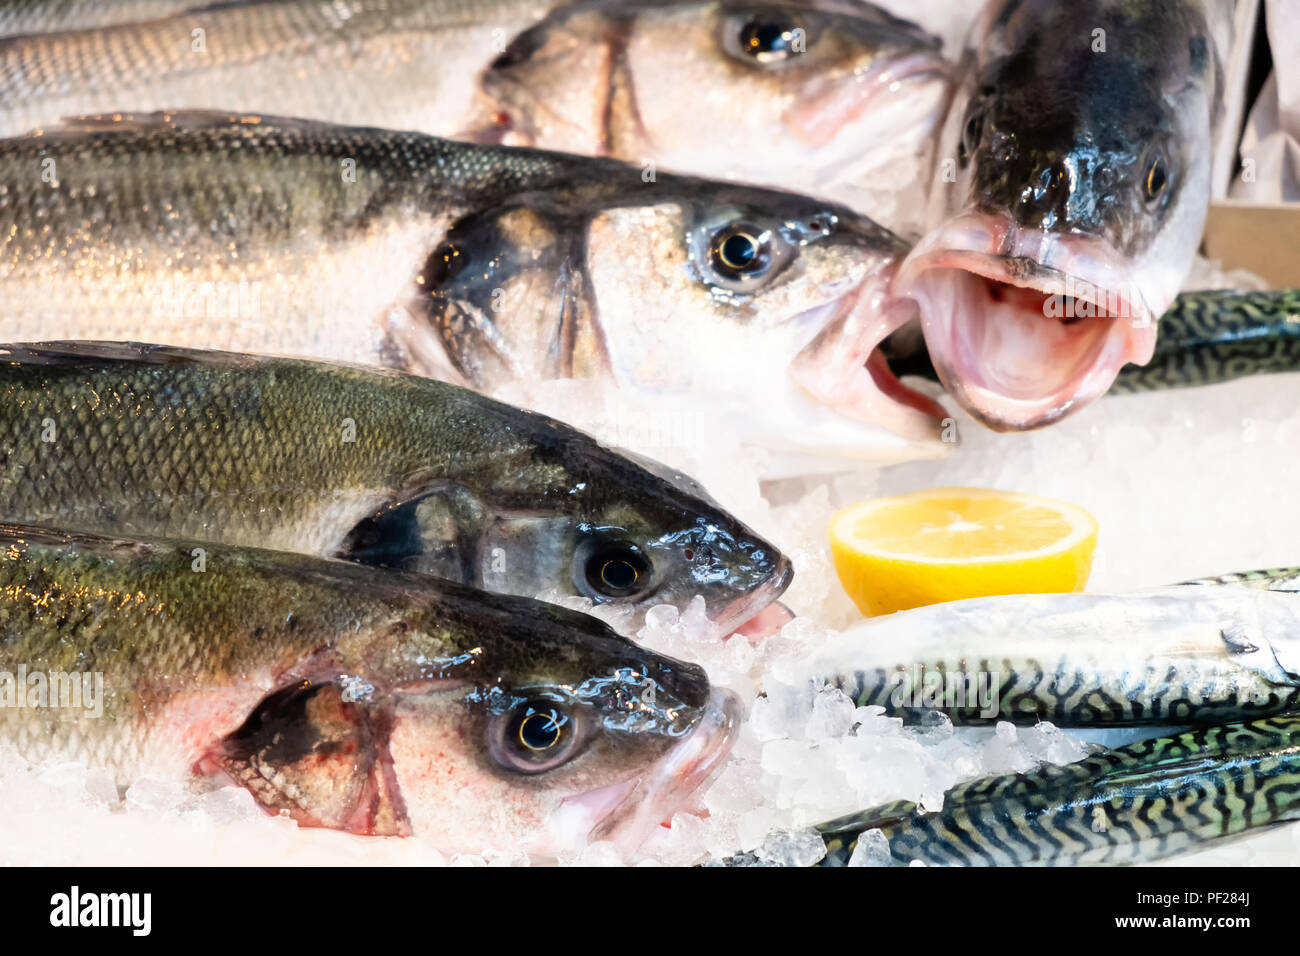 Fresh fish on sale in a London market Stock Photo